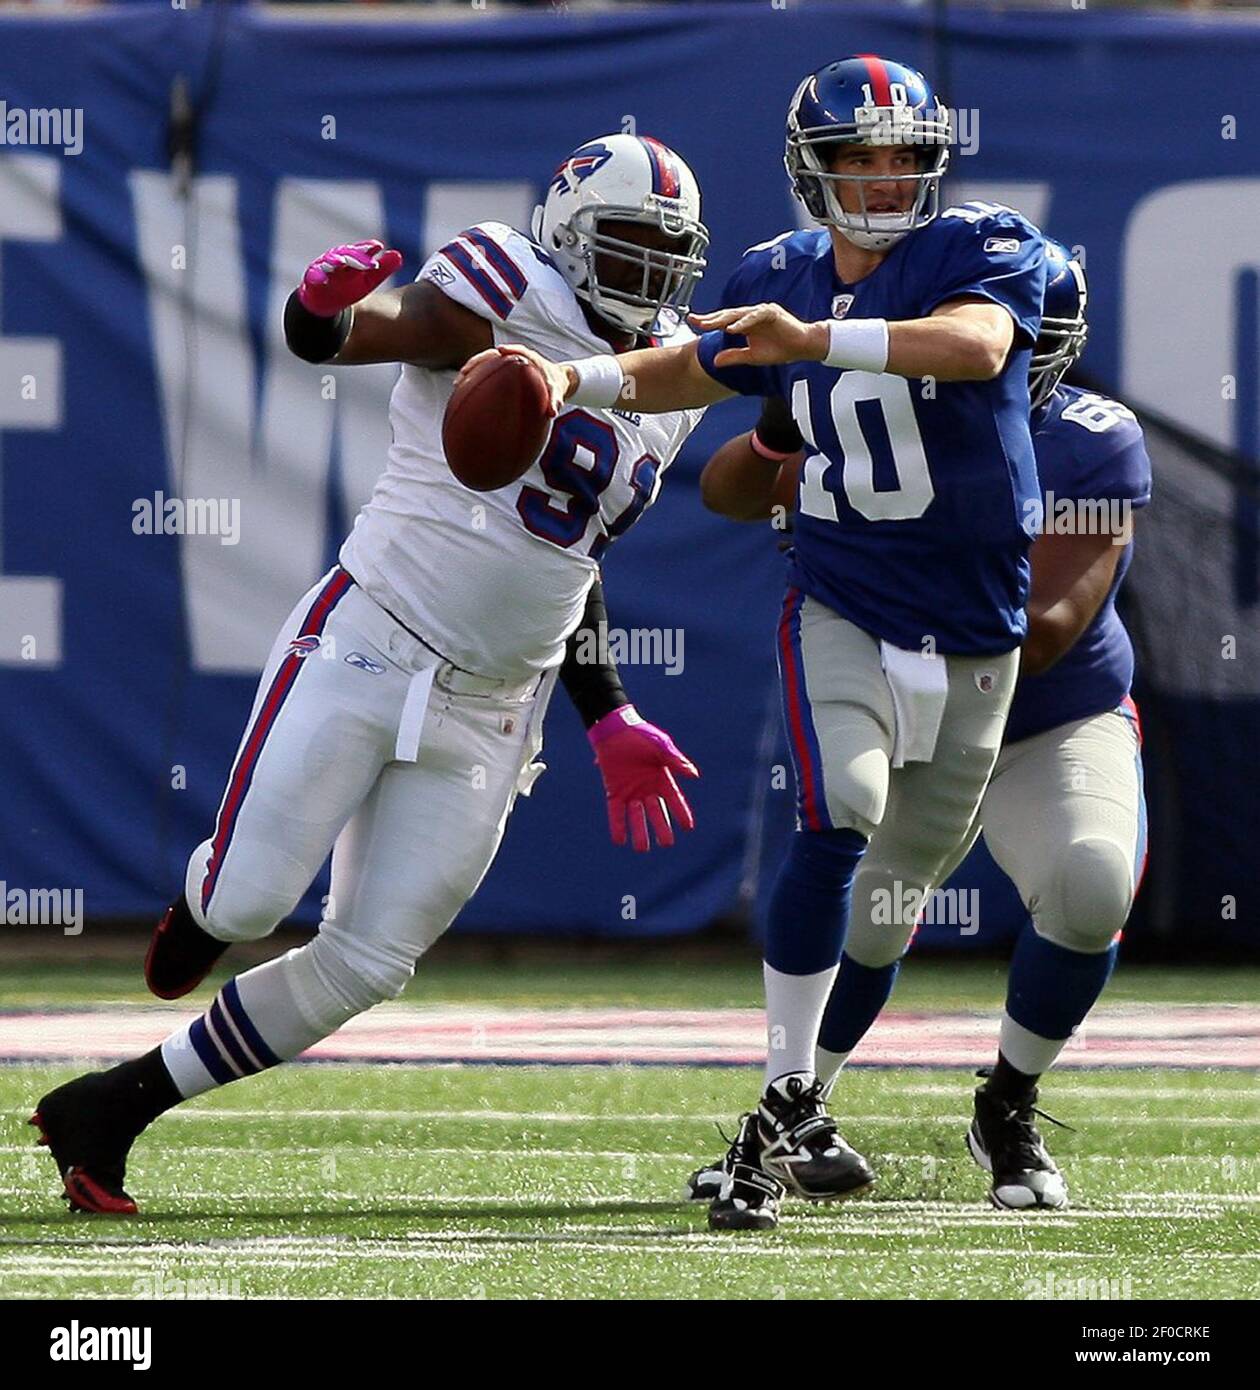 New York Giants quarterback Eli Manning is chased down by Buffalo Bills  Spencer Johnson at MetLife Stadium in East Rutherford, New Jersey, Sunday,  October 16, 2011. The Giant defeated the Bills, 27-24. (